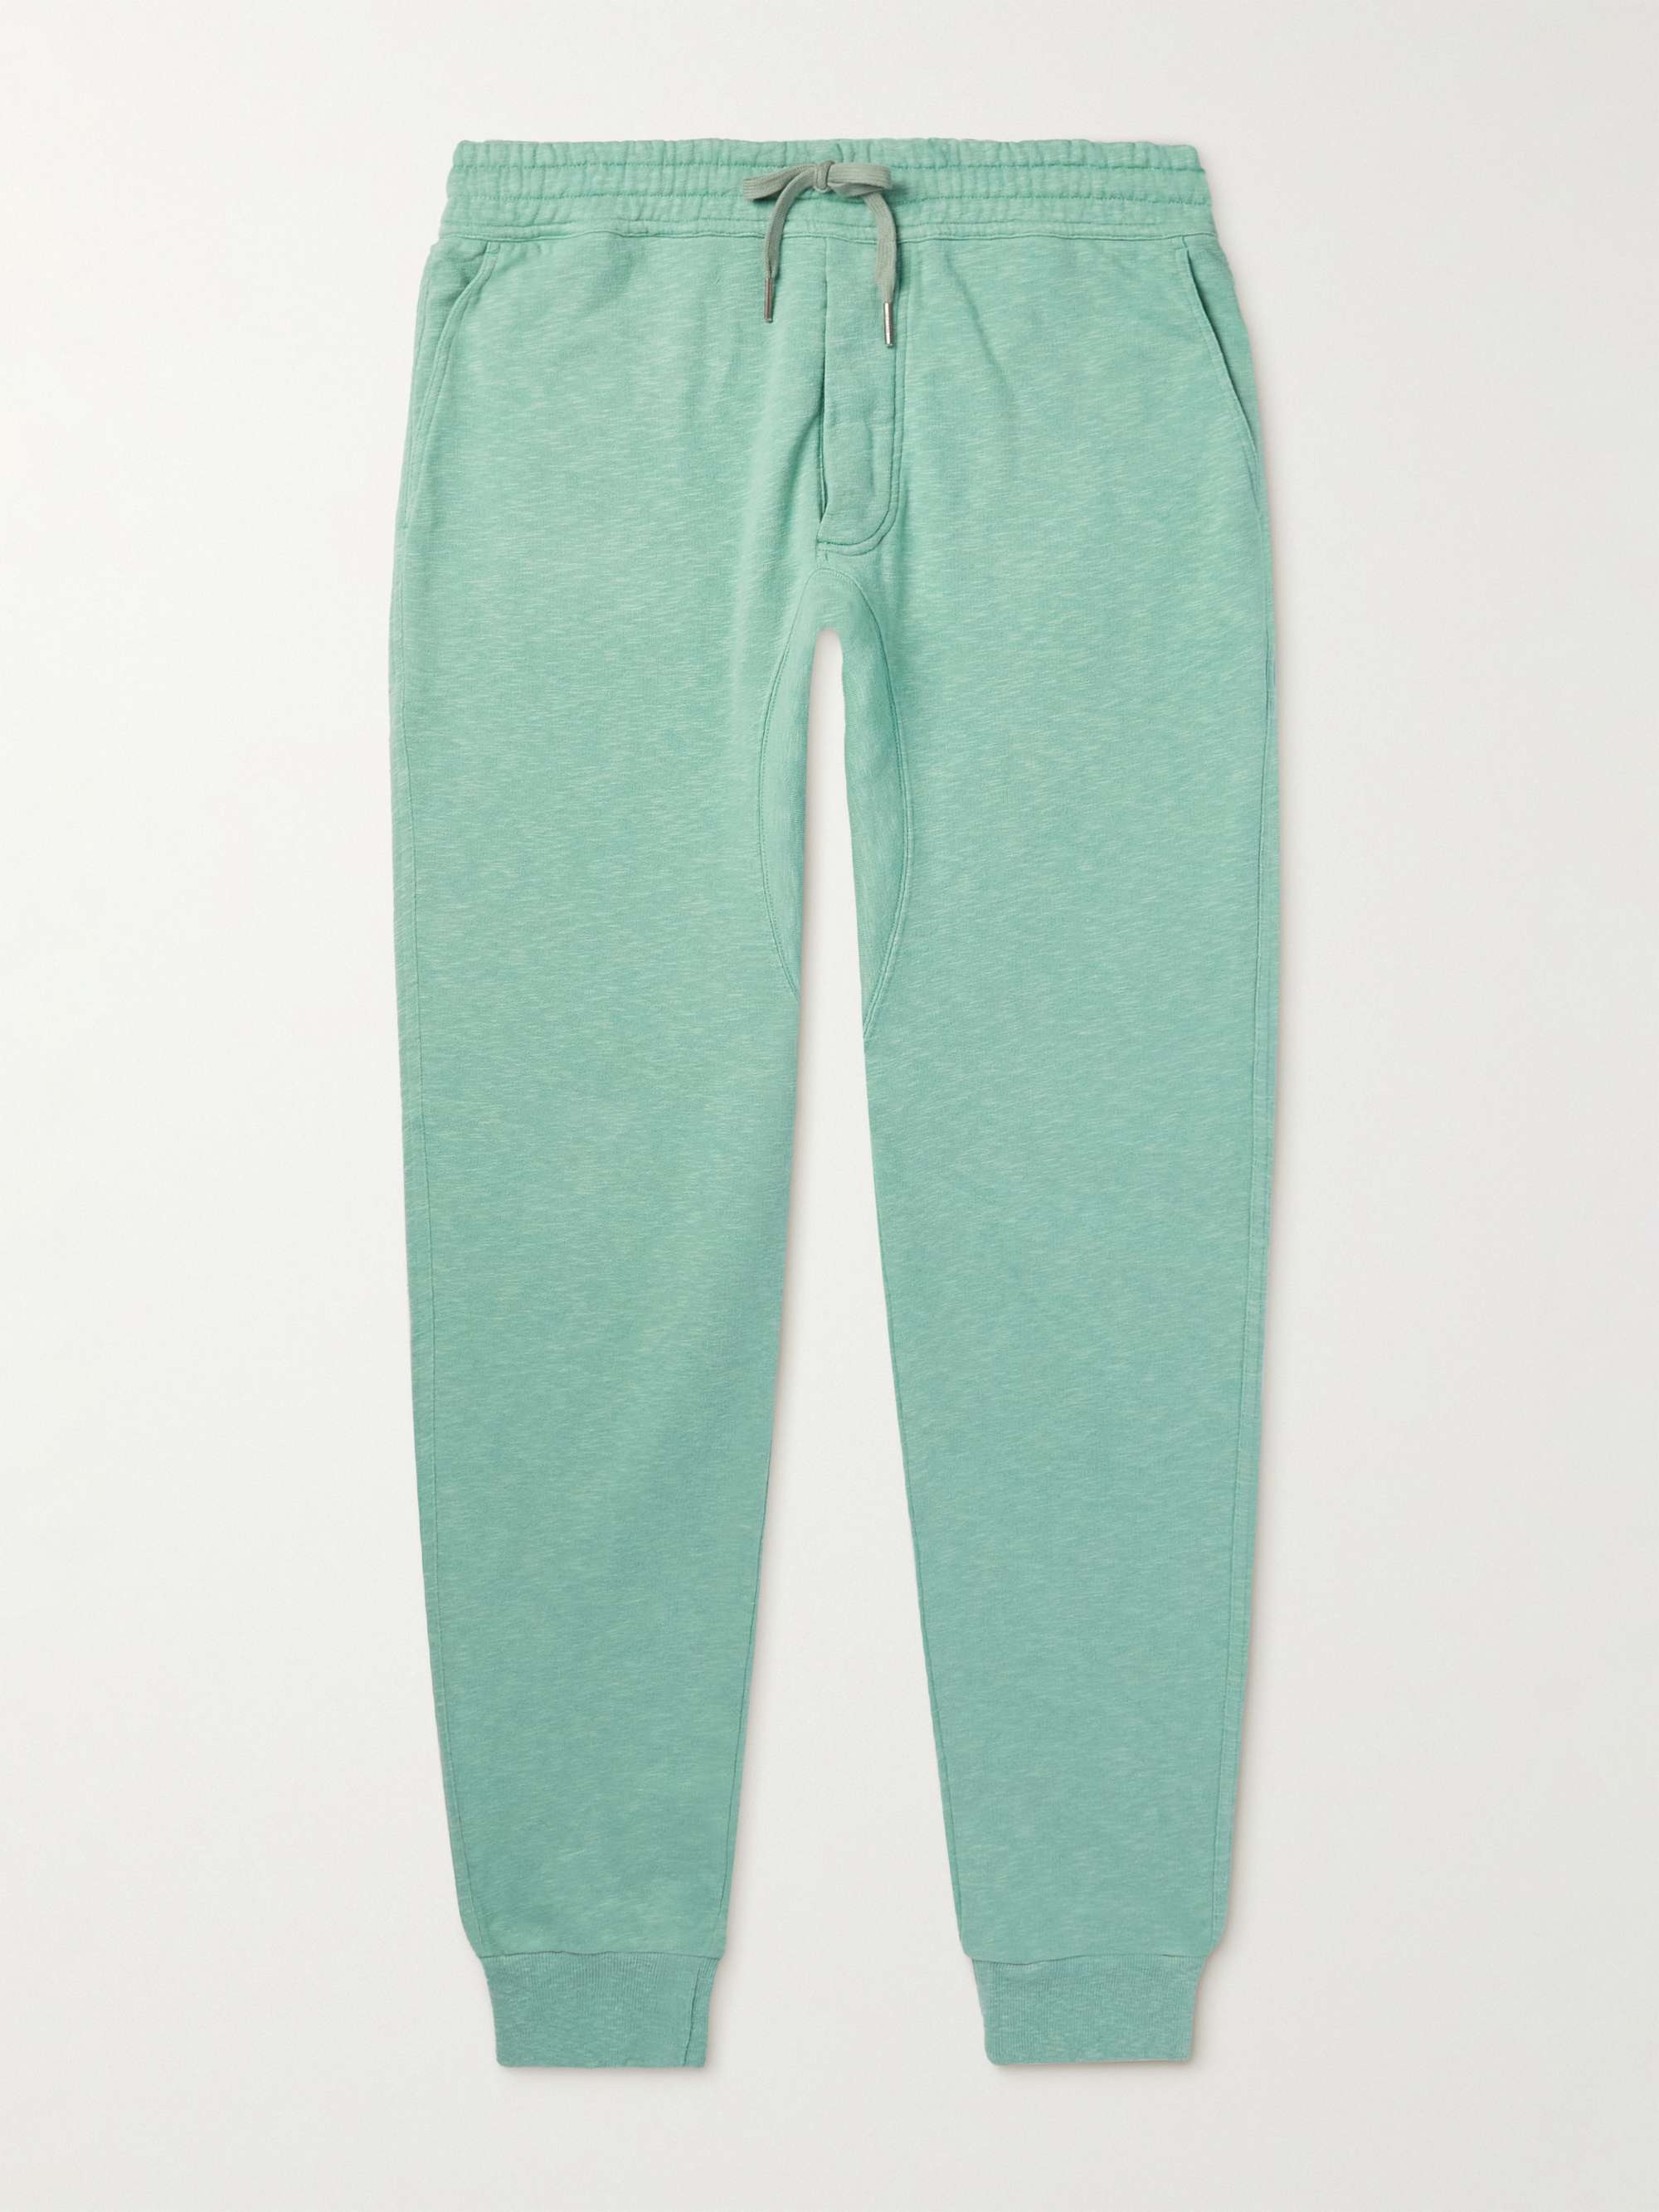 TOM FORD Tapered Cotton-Blend Jersey Sweatpants